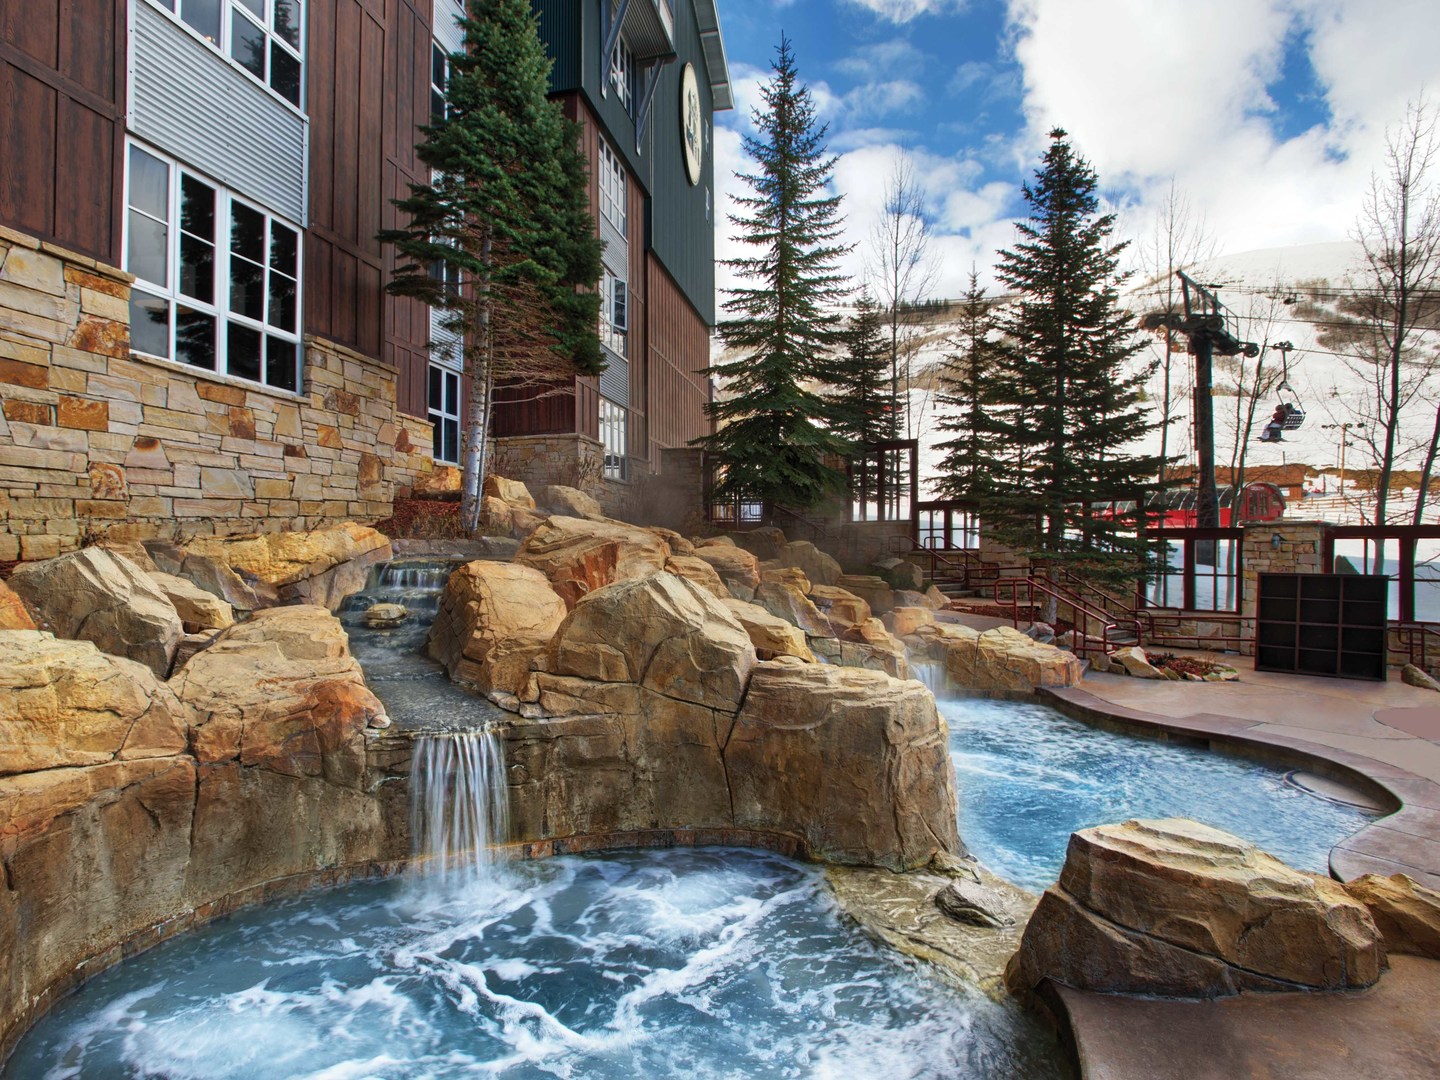 Marriott's MountainSide Hot Tub. Marriott's MountainSide is located in Park City, Utah United States.